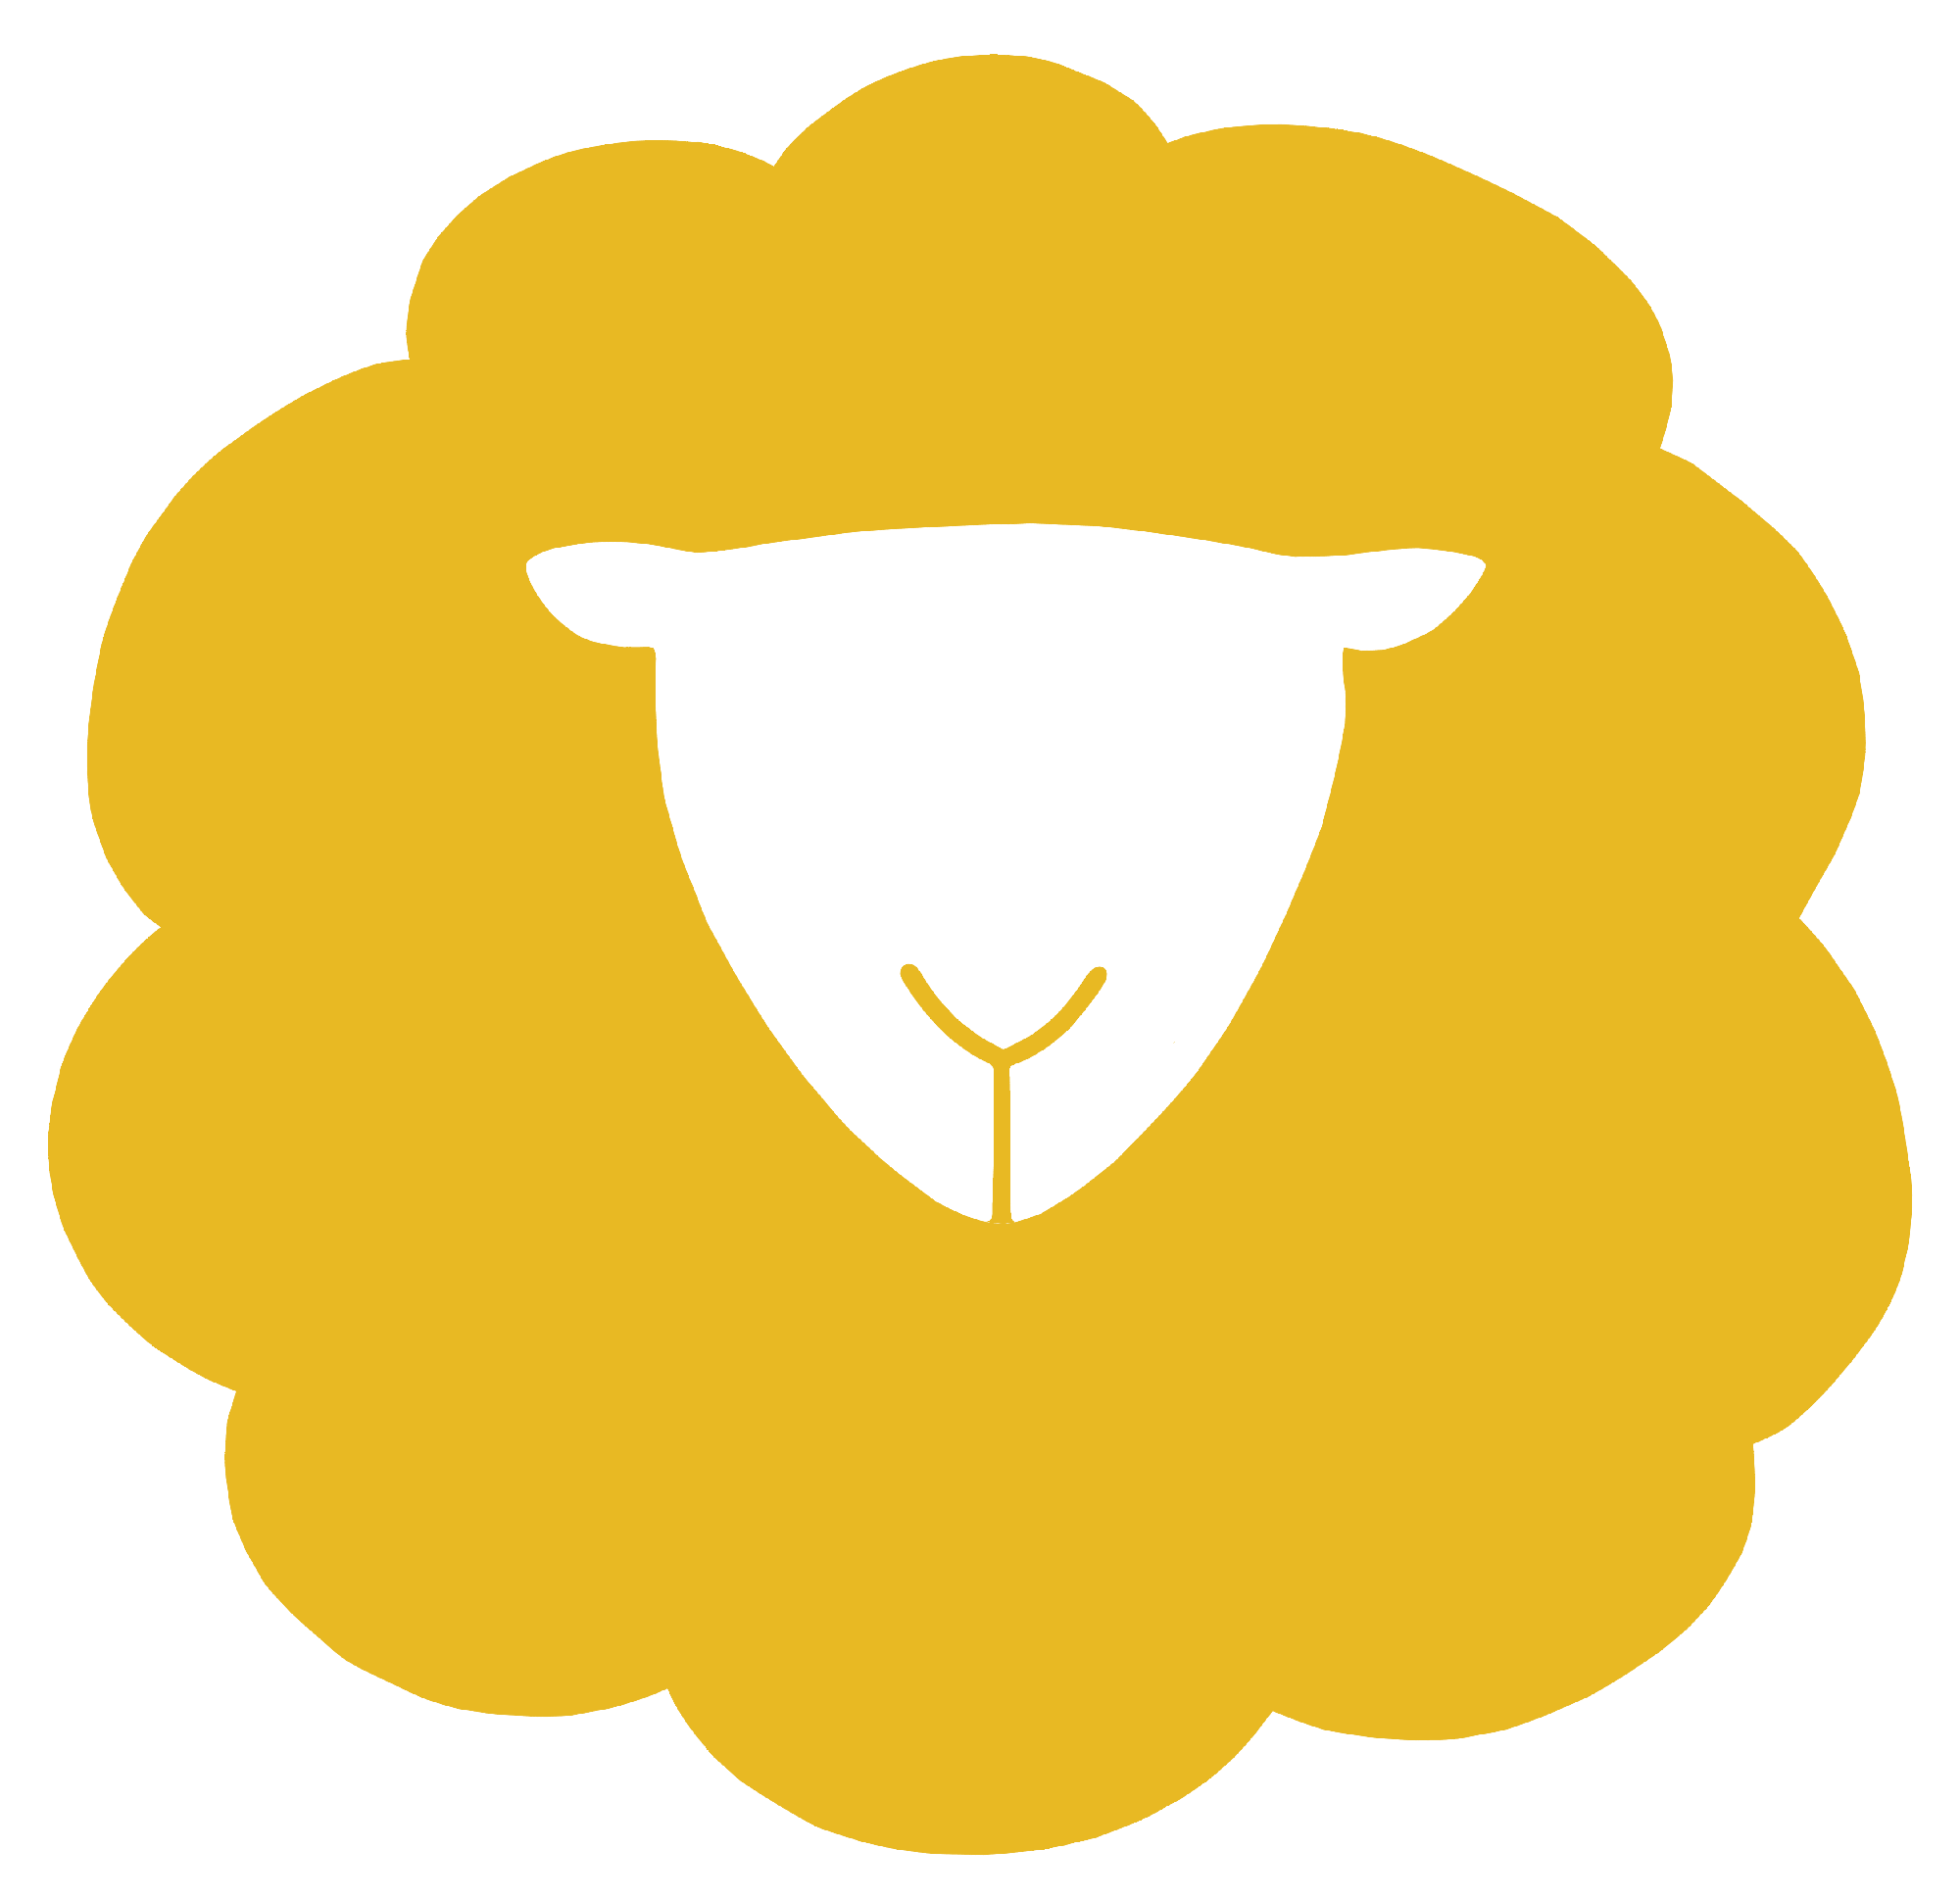 image of a small yellow sheep with a white head